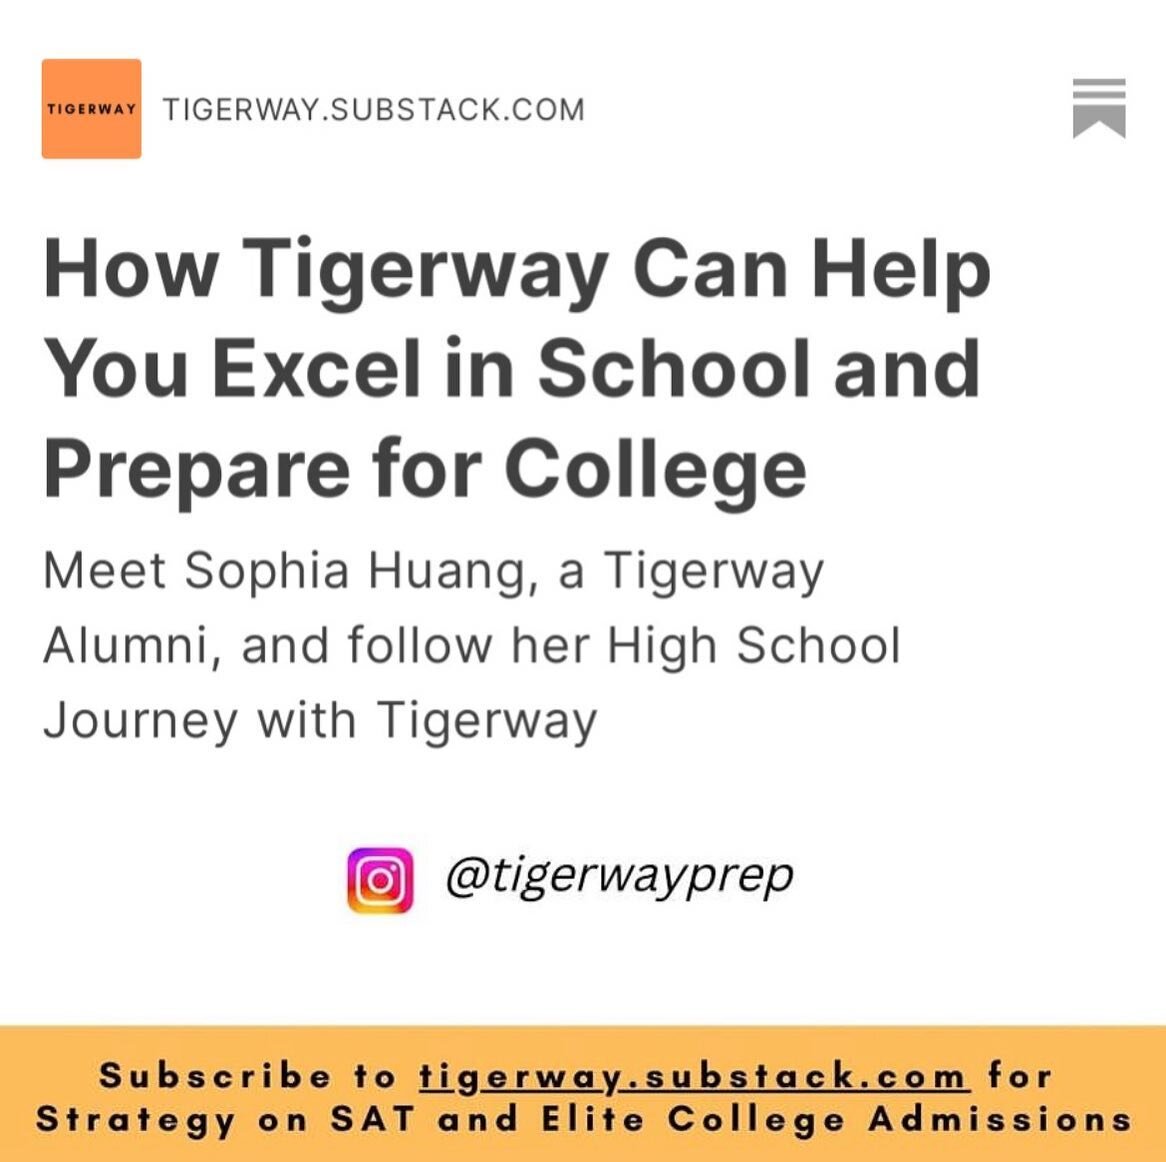 ‼️Program Officer @jxsminengo and Coach @larrycheungcfa have released the latest Premium Weekly Analysis! This week, I met with Sophia Huang to talk about her experience in Tigerway and her future goals after high school. 

📧Make sure to join our em